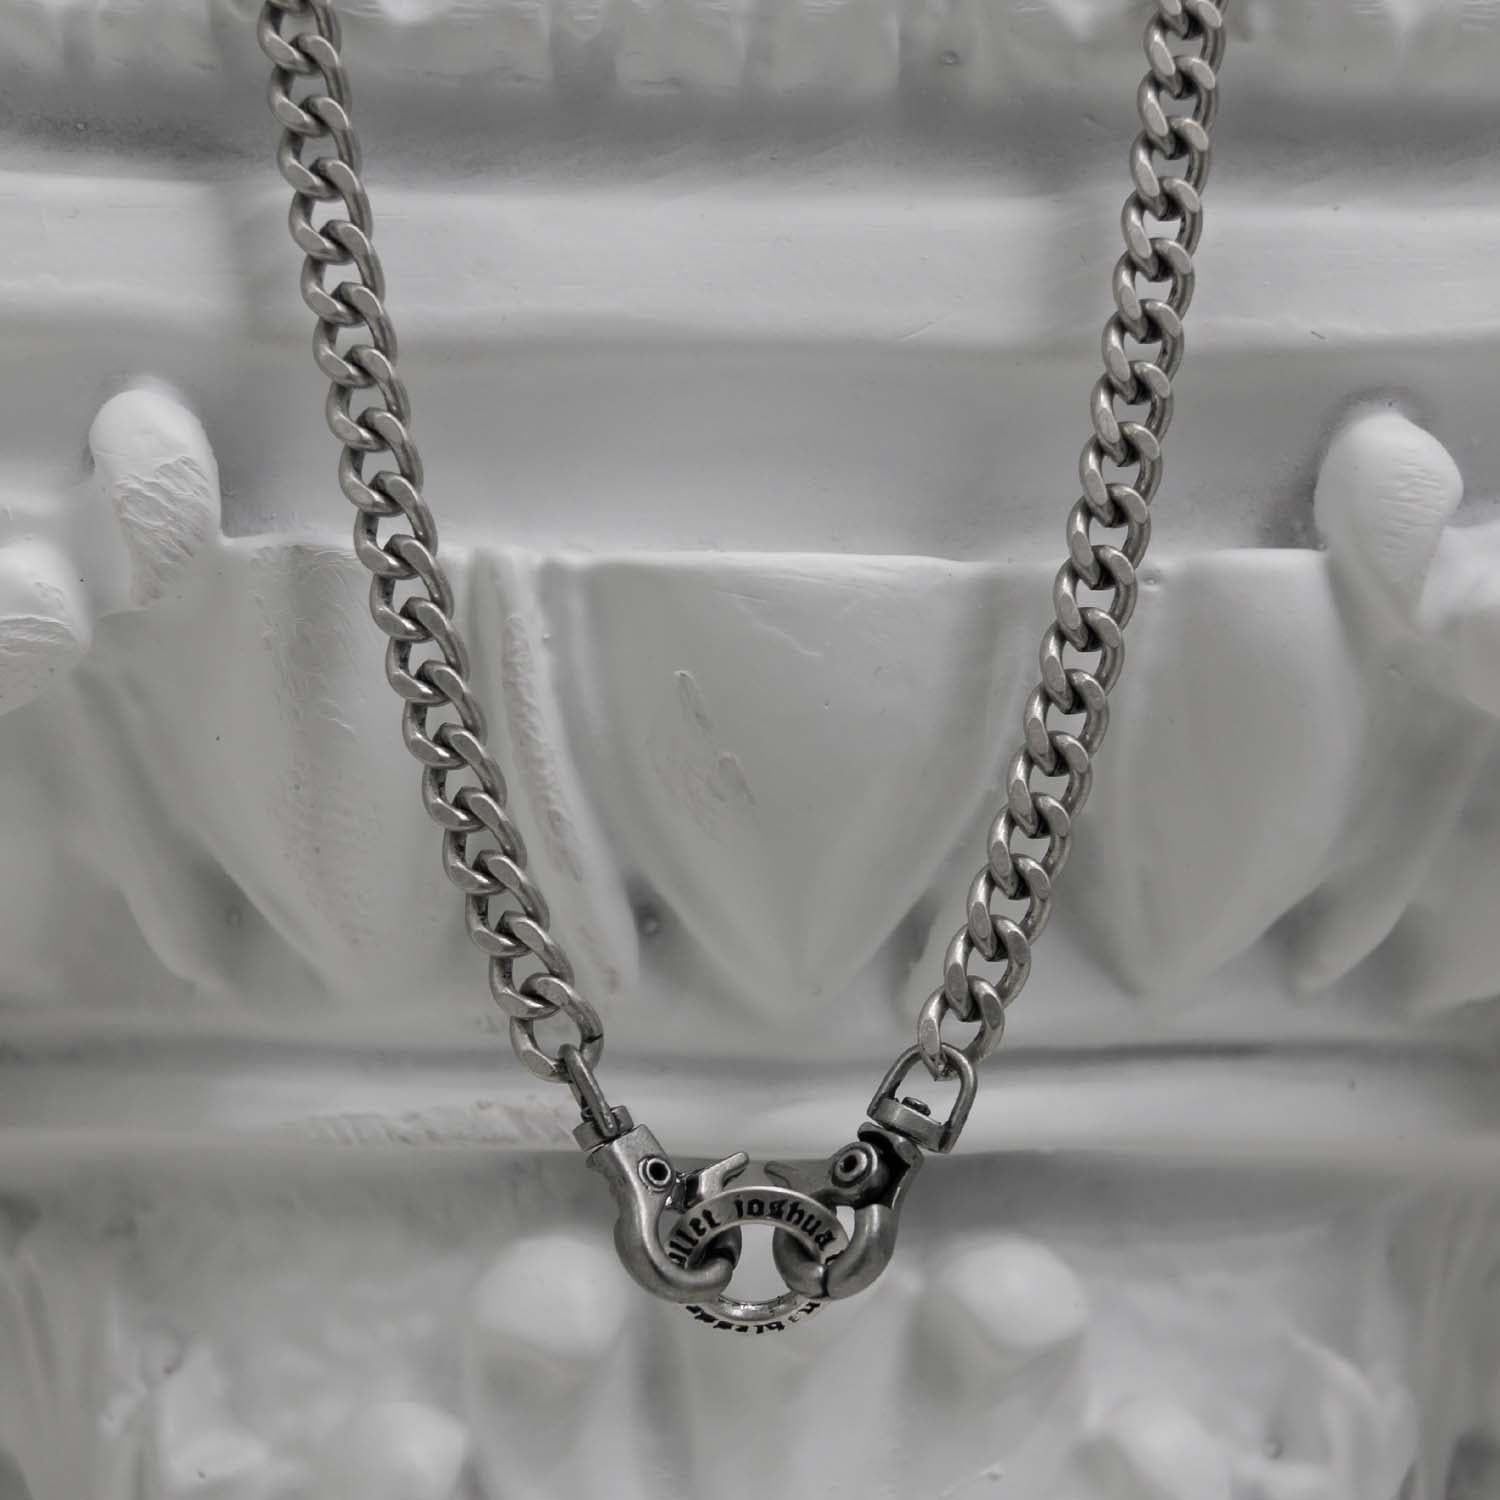 7mm Classic Chain Necklace & Pants Chain